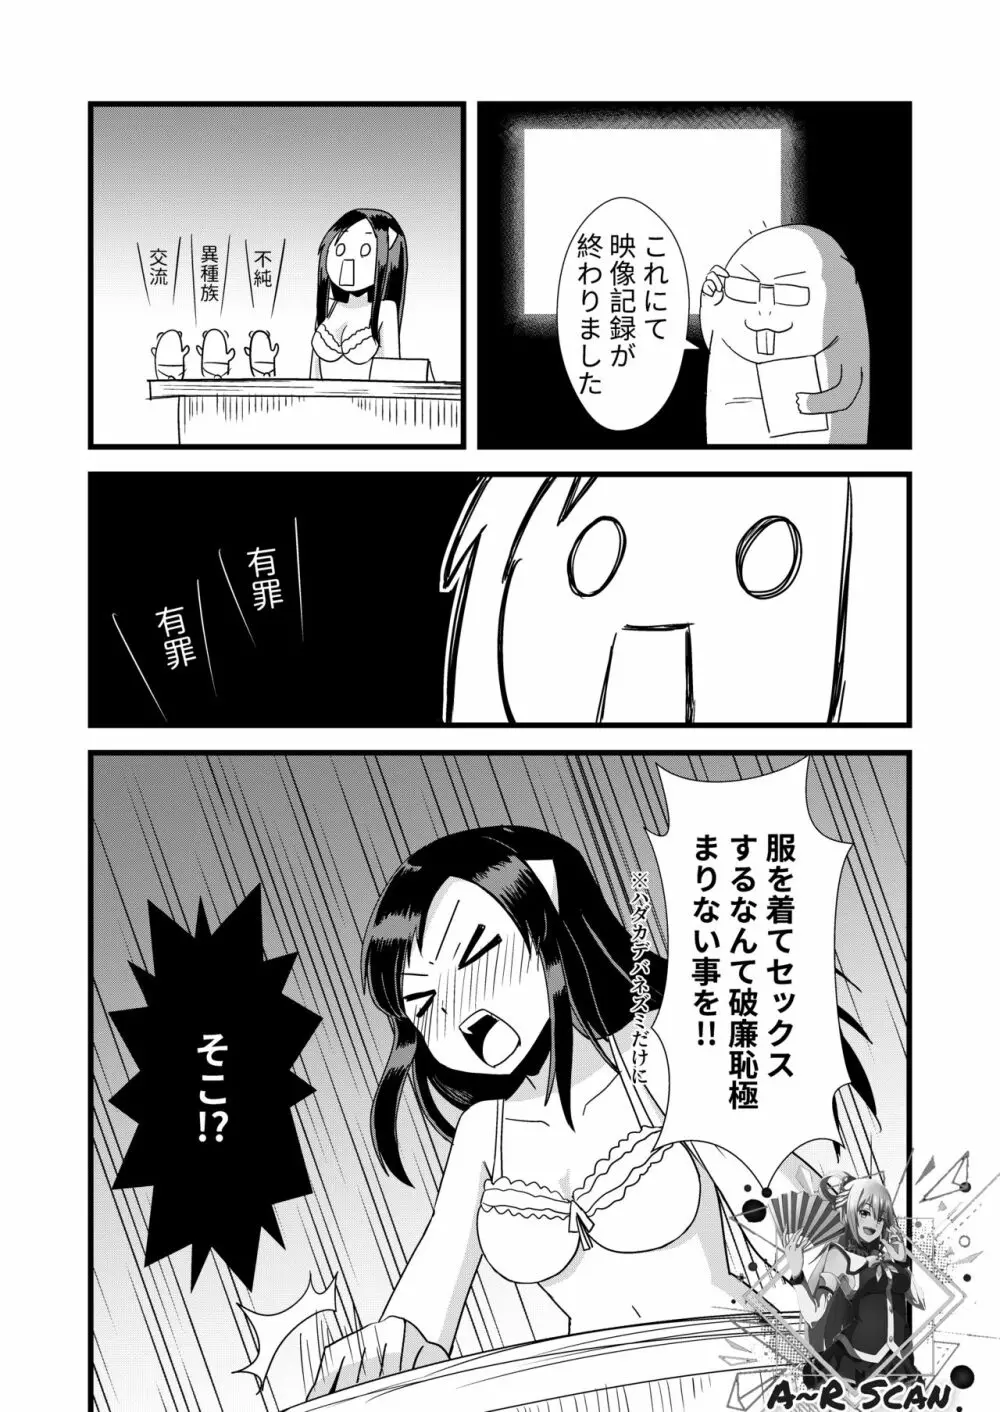 んばっばんばんばんばんばんばっば! - page17